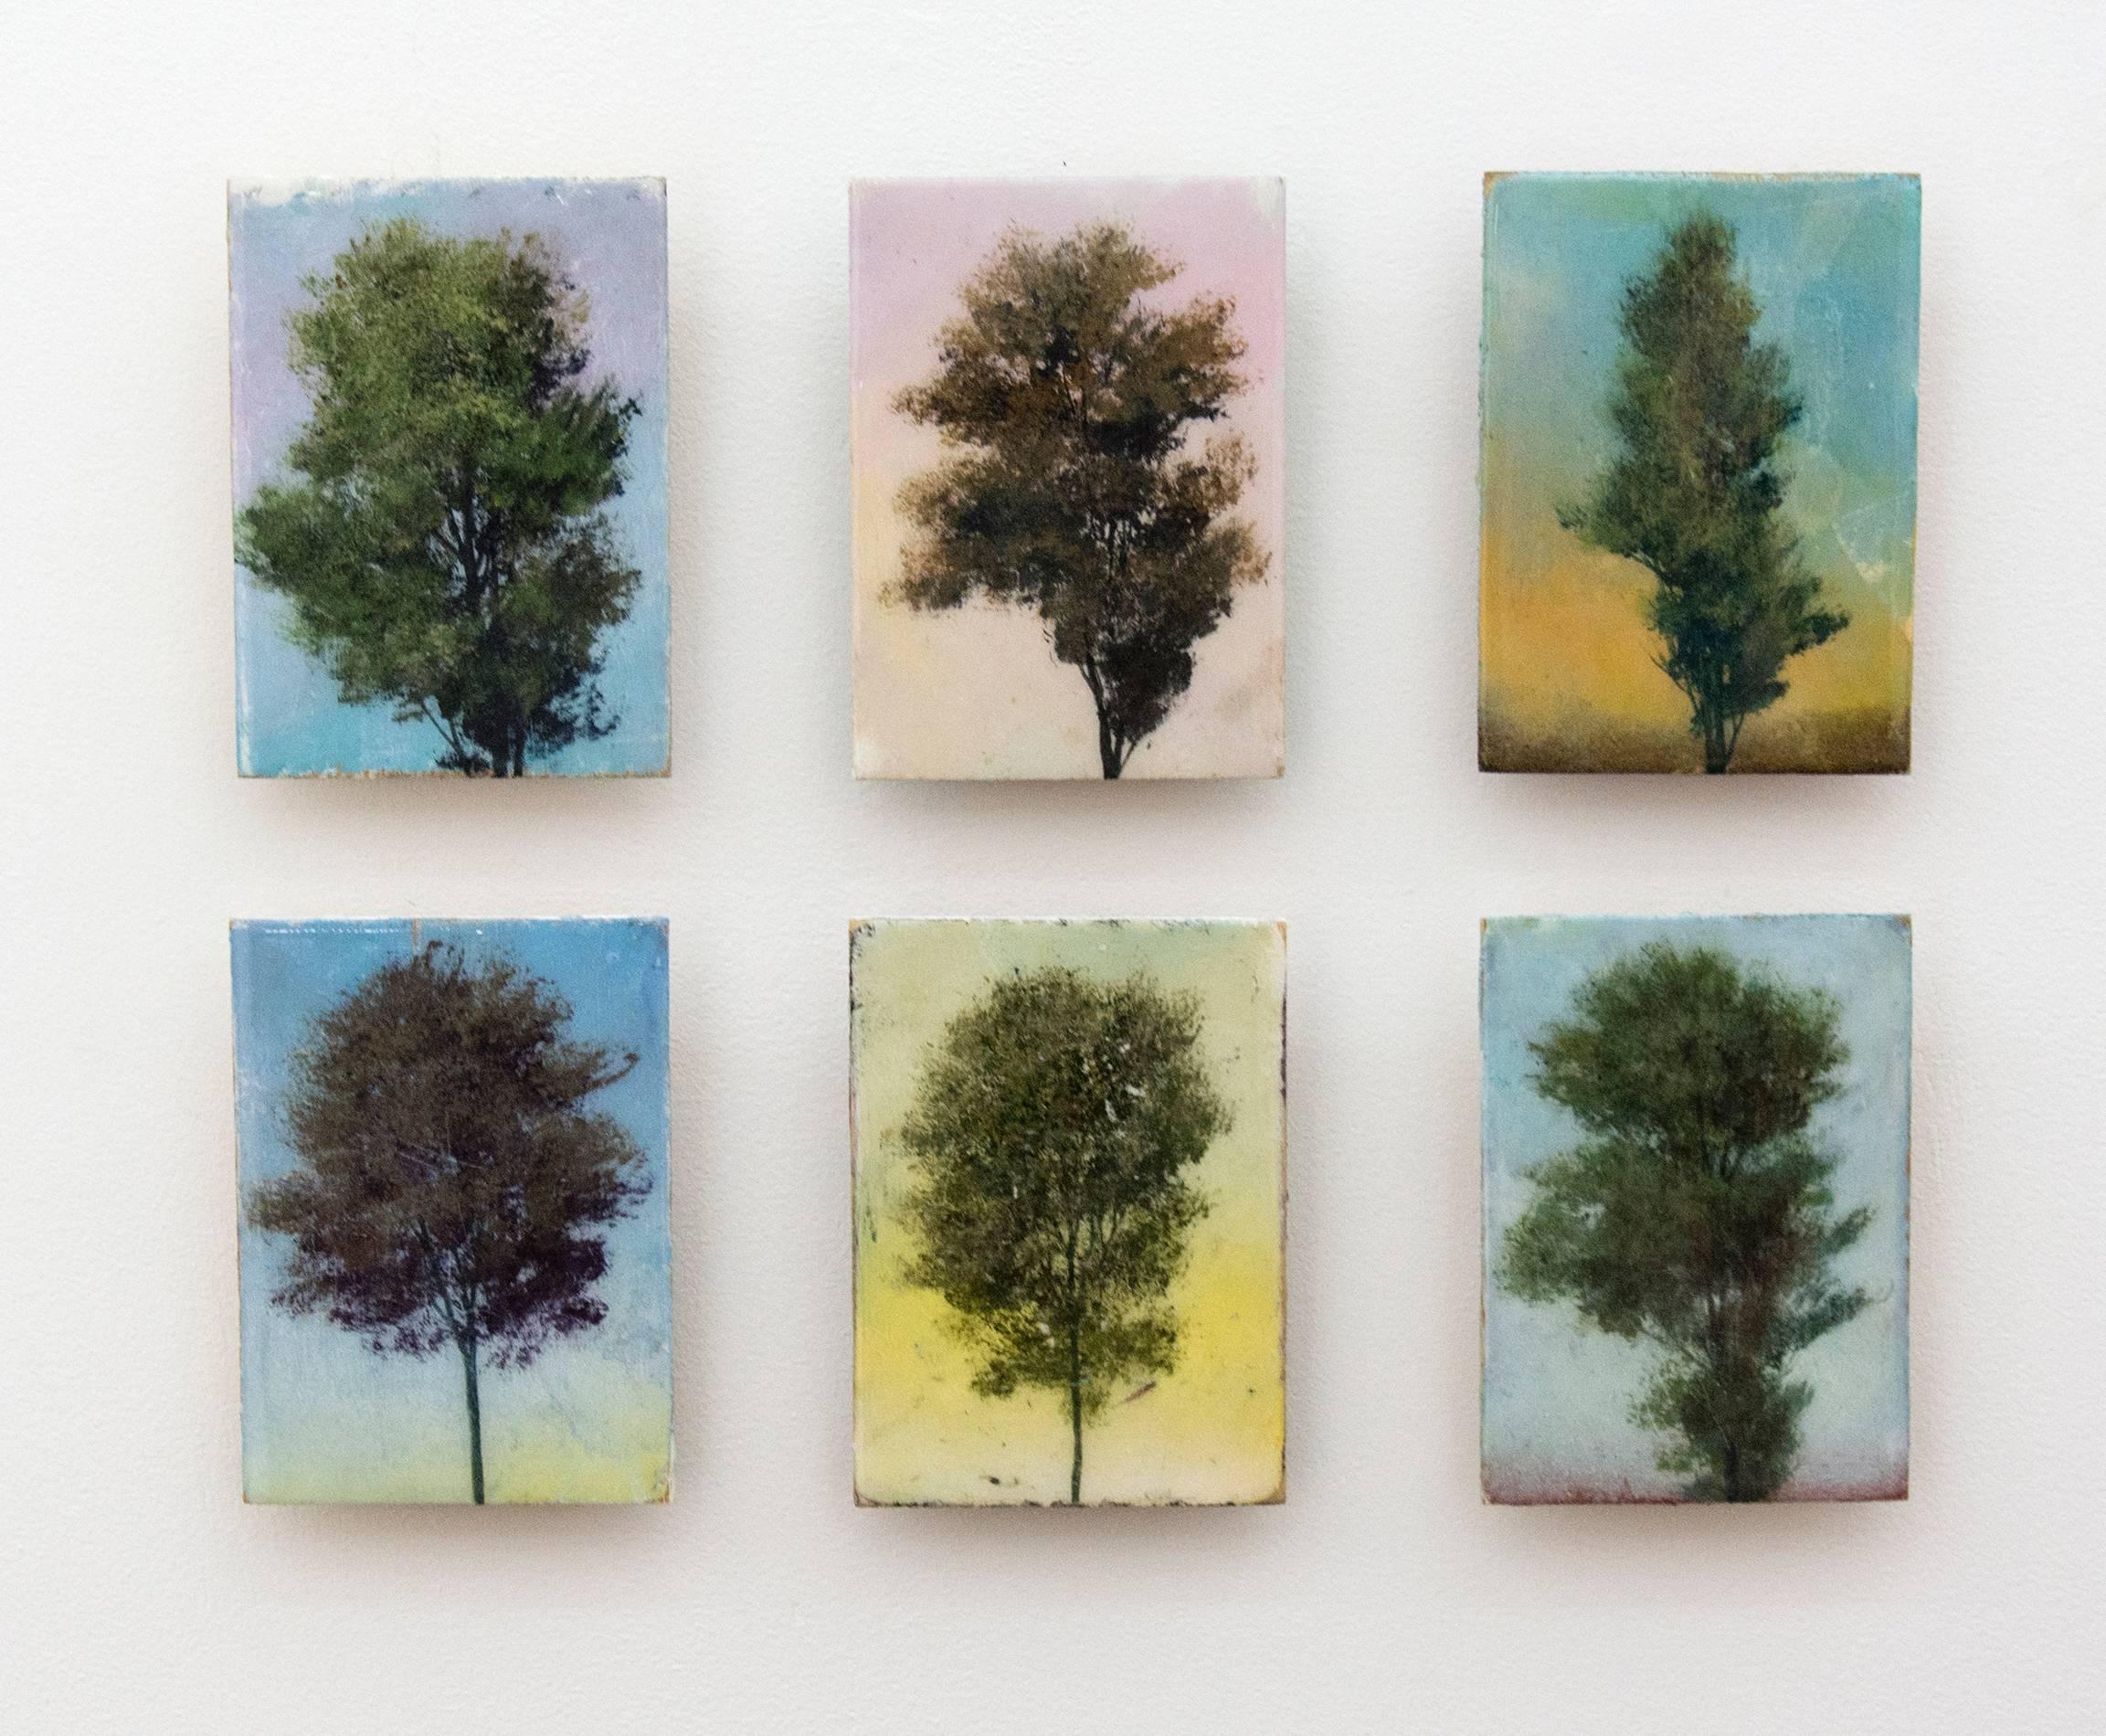 A trio of singular trees displayed on colorful and textured backgrounds.  The surface is resined. 

Born in Brantford Ontario in 1965, Hoffer has a M.F.A. from Concordia University in Montréal, degrees from the University of Guelph, Ontario, and